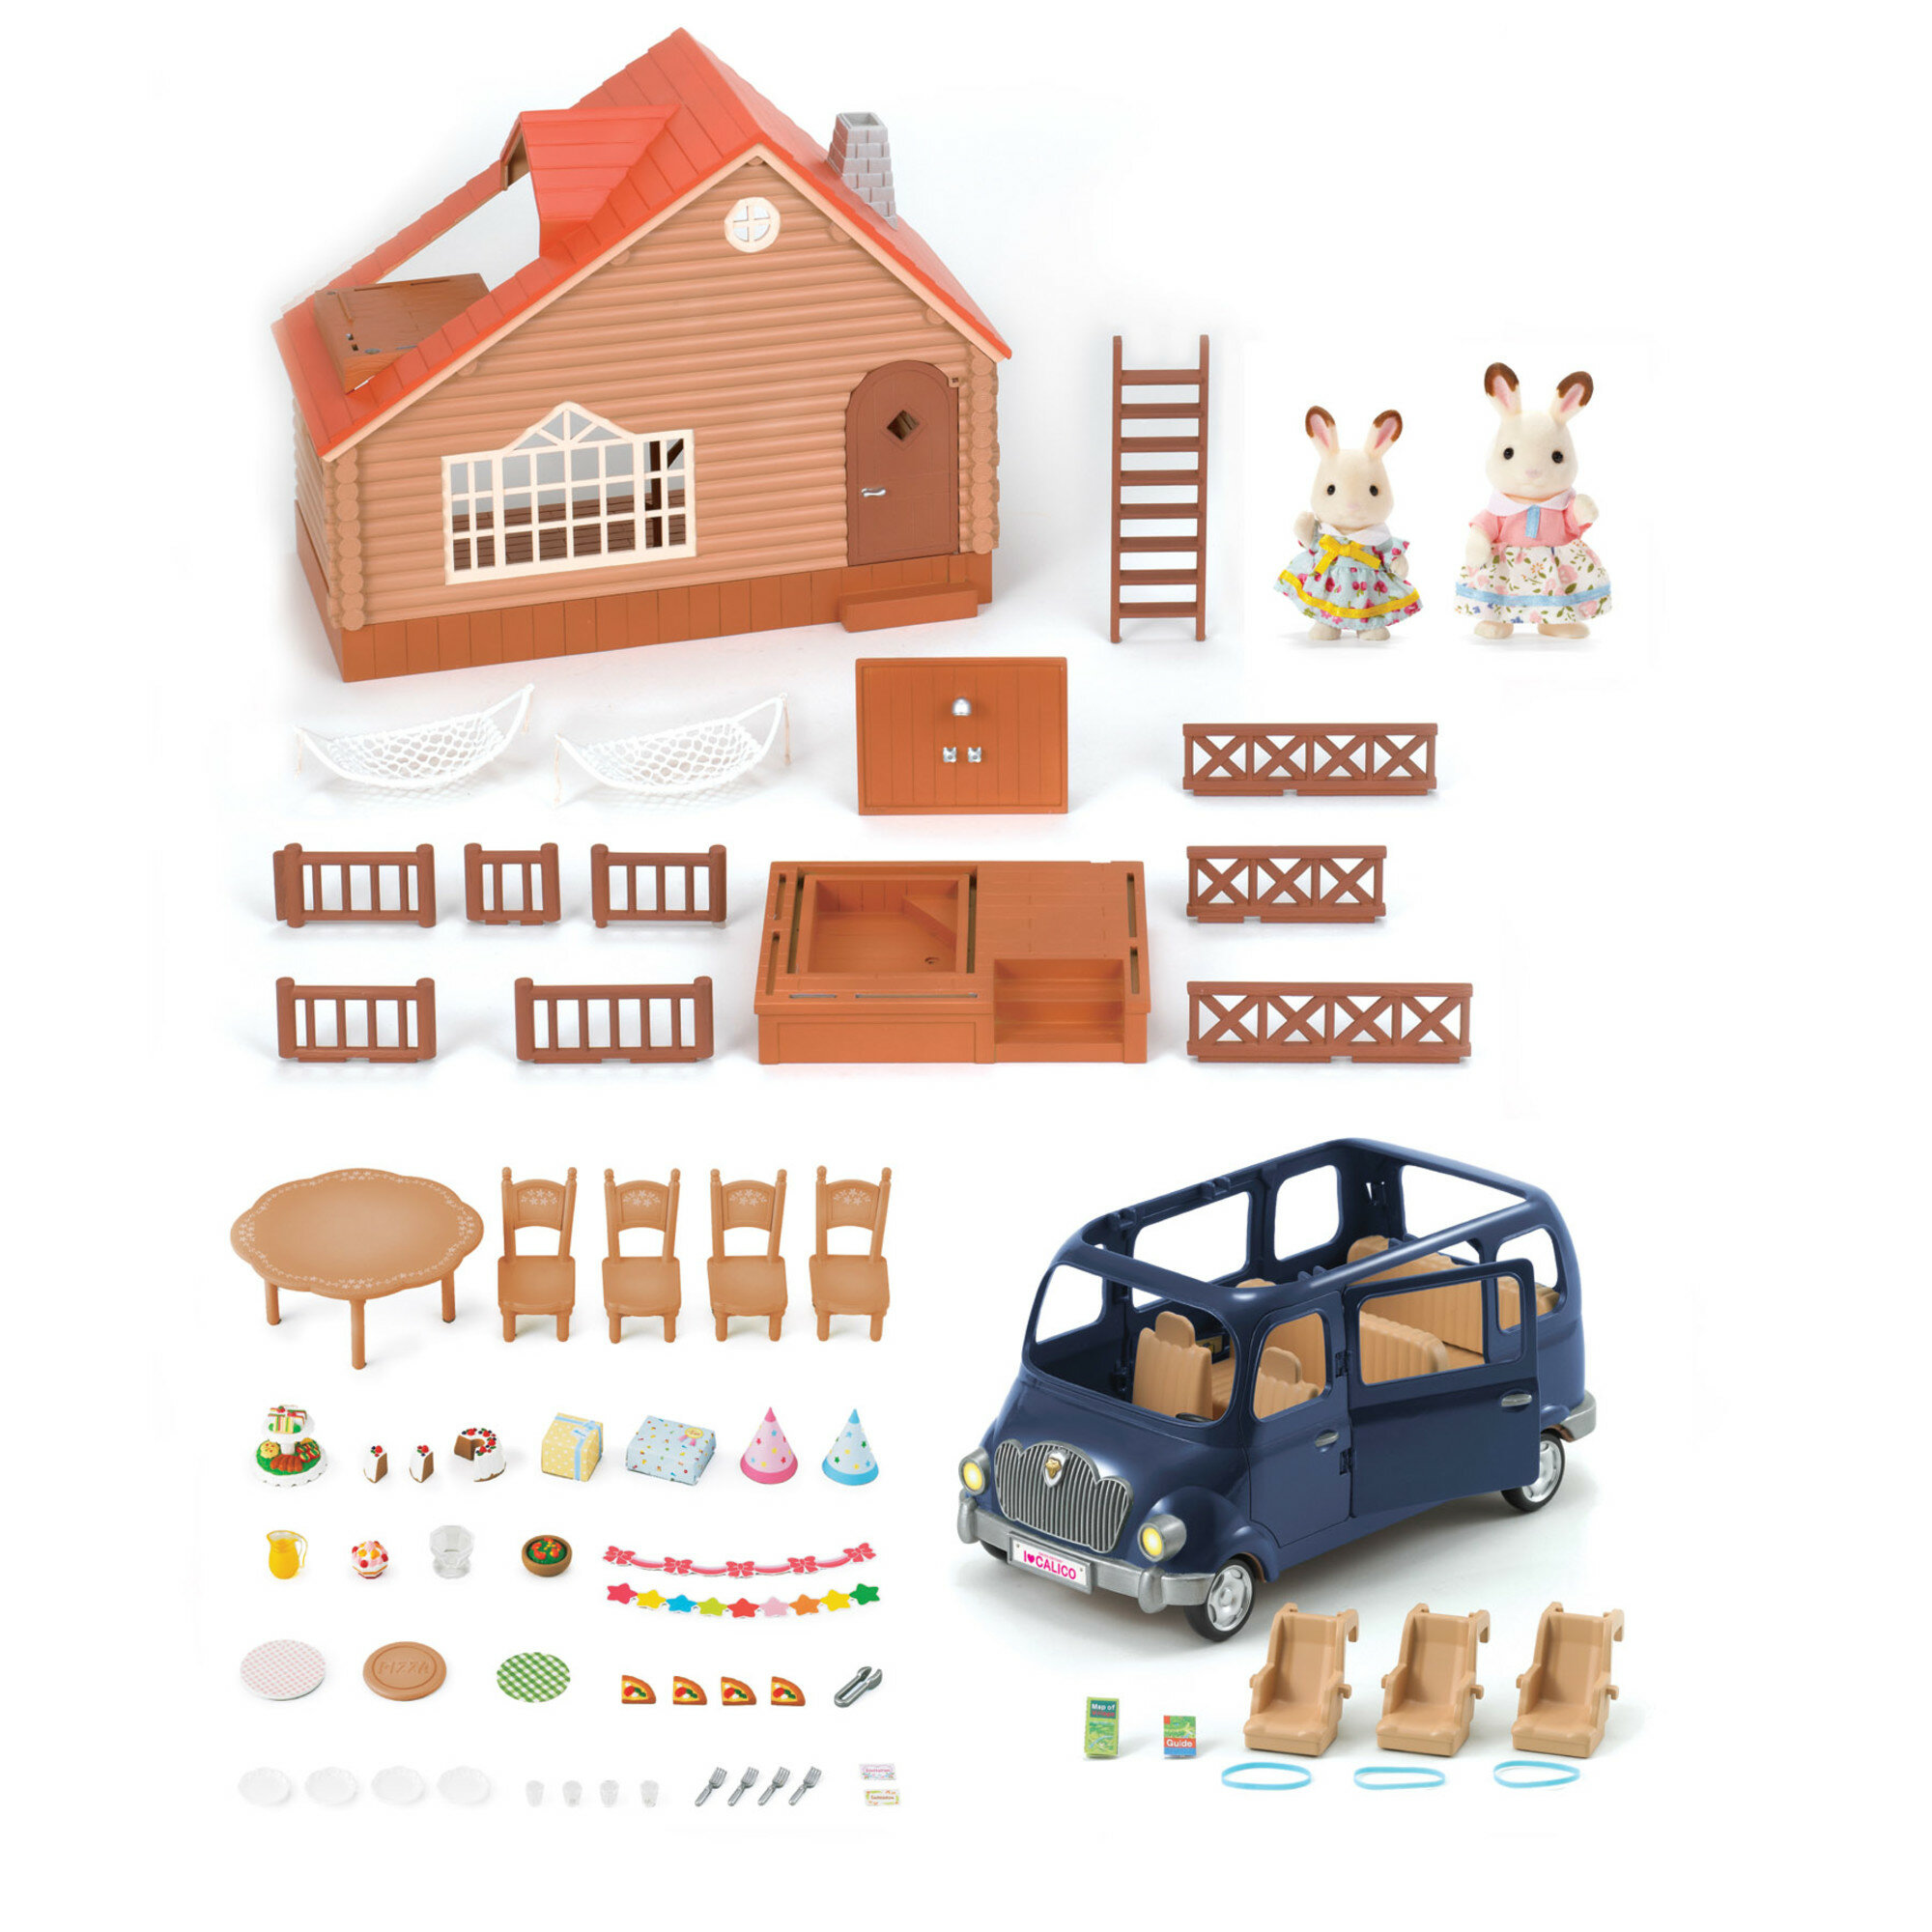 Calico Critters Lakeside Lodge Gift Set for sale online 